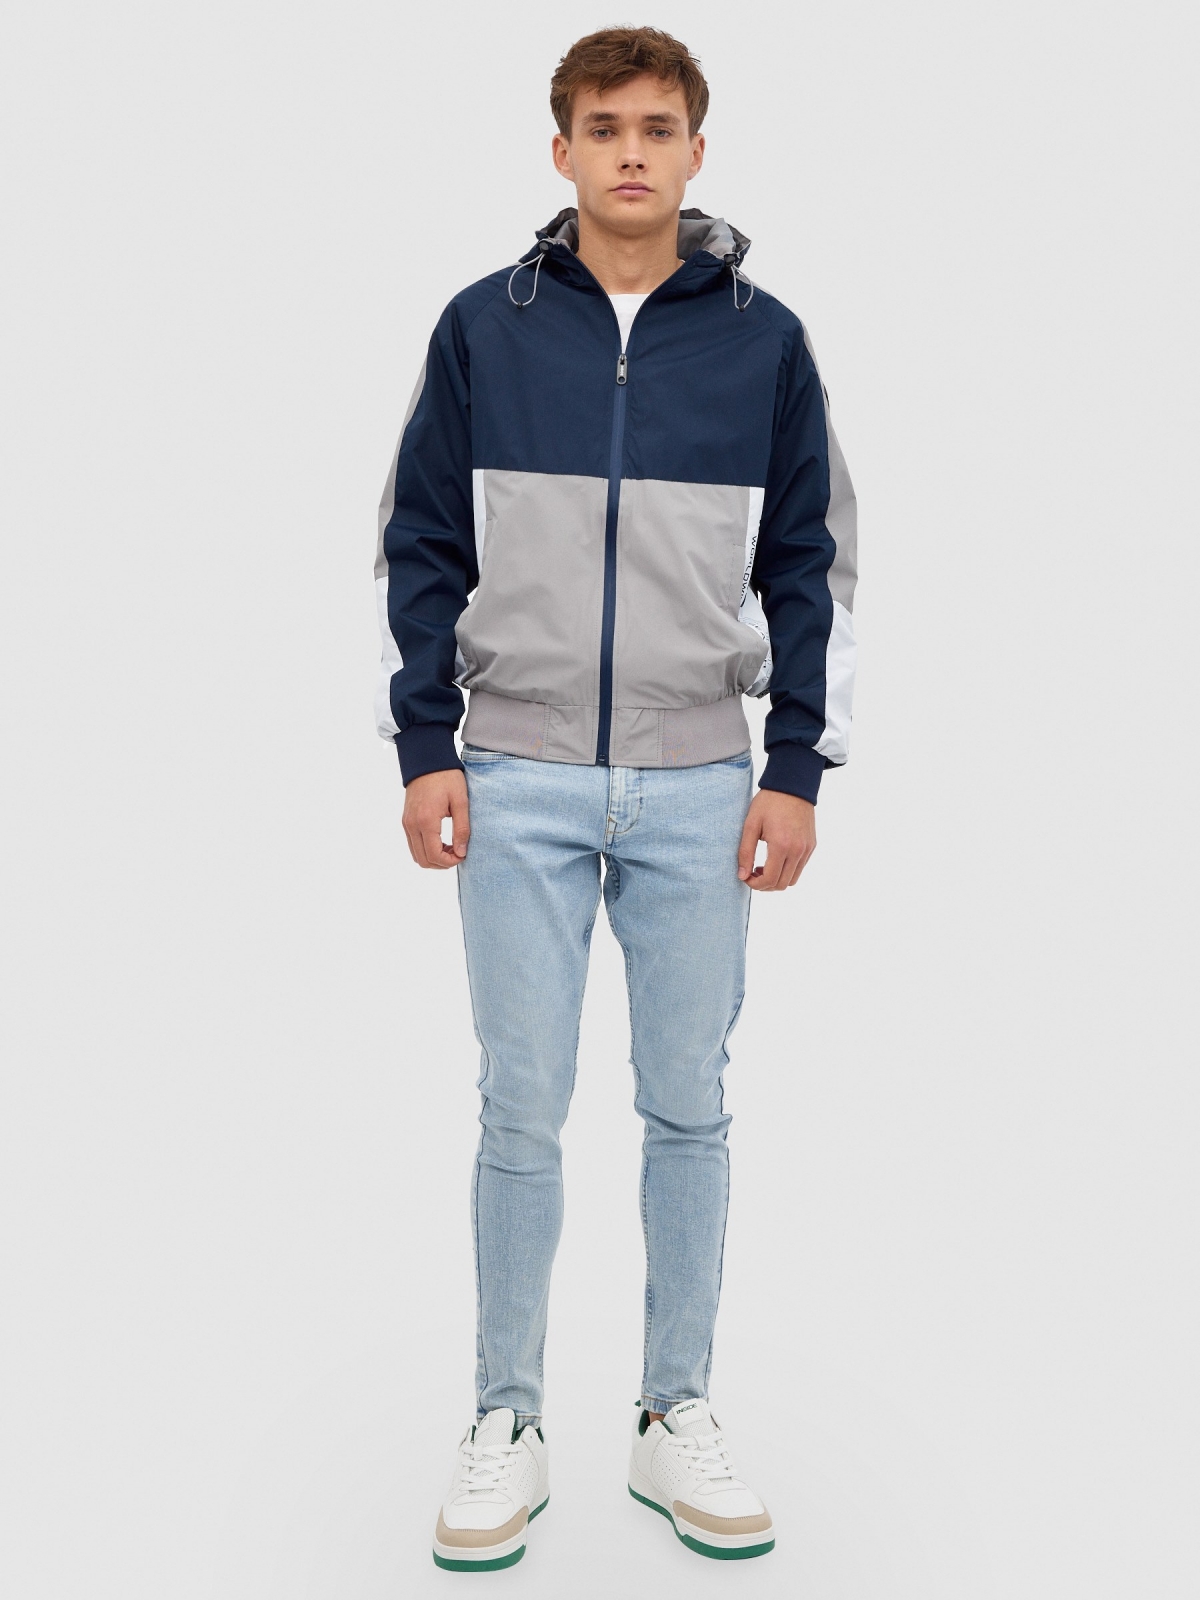 Lightweight hooded jacket navy front view